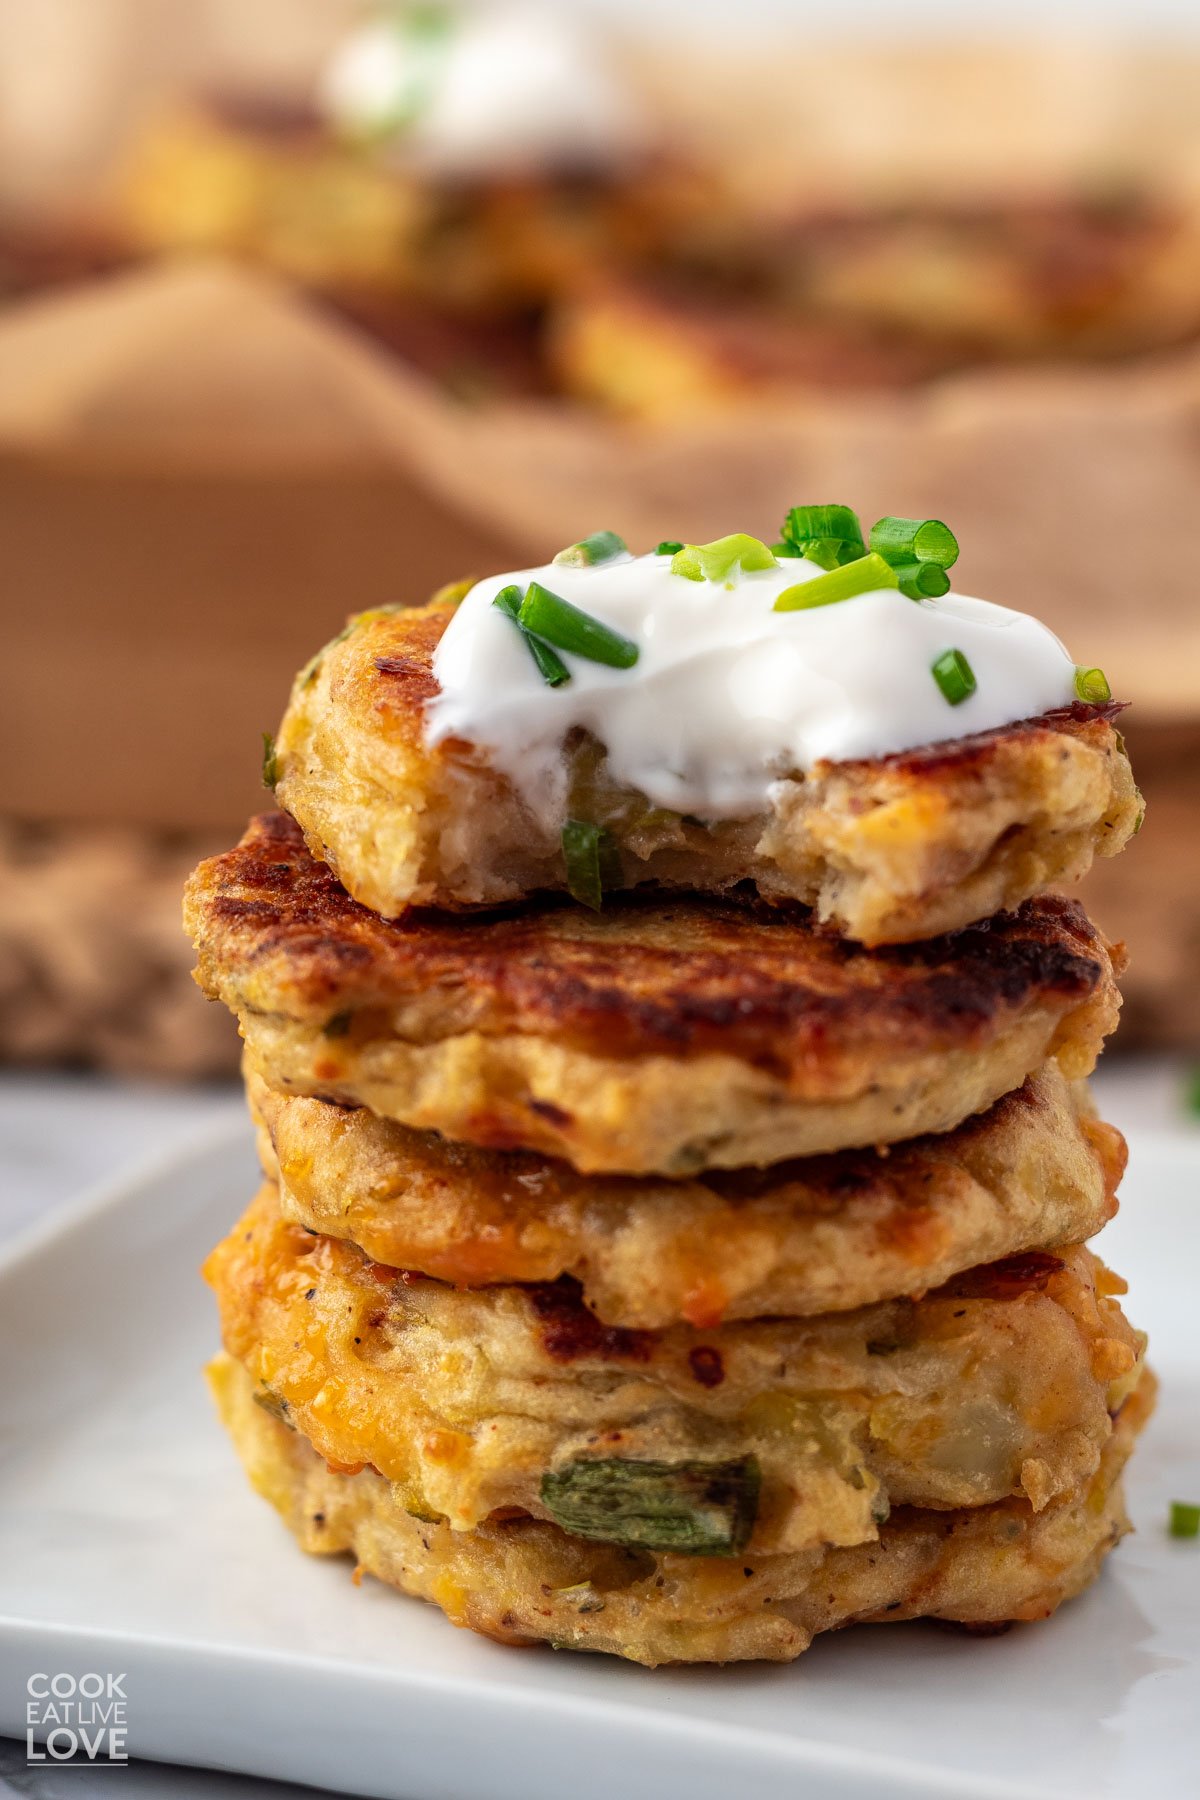 Stack of 5 potato fritters on a white plate with the top one missing a bite to show the inside and topped with sour cream and chives.